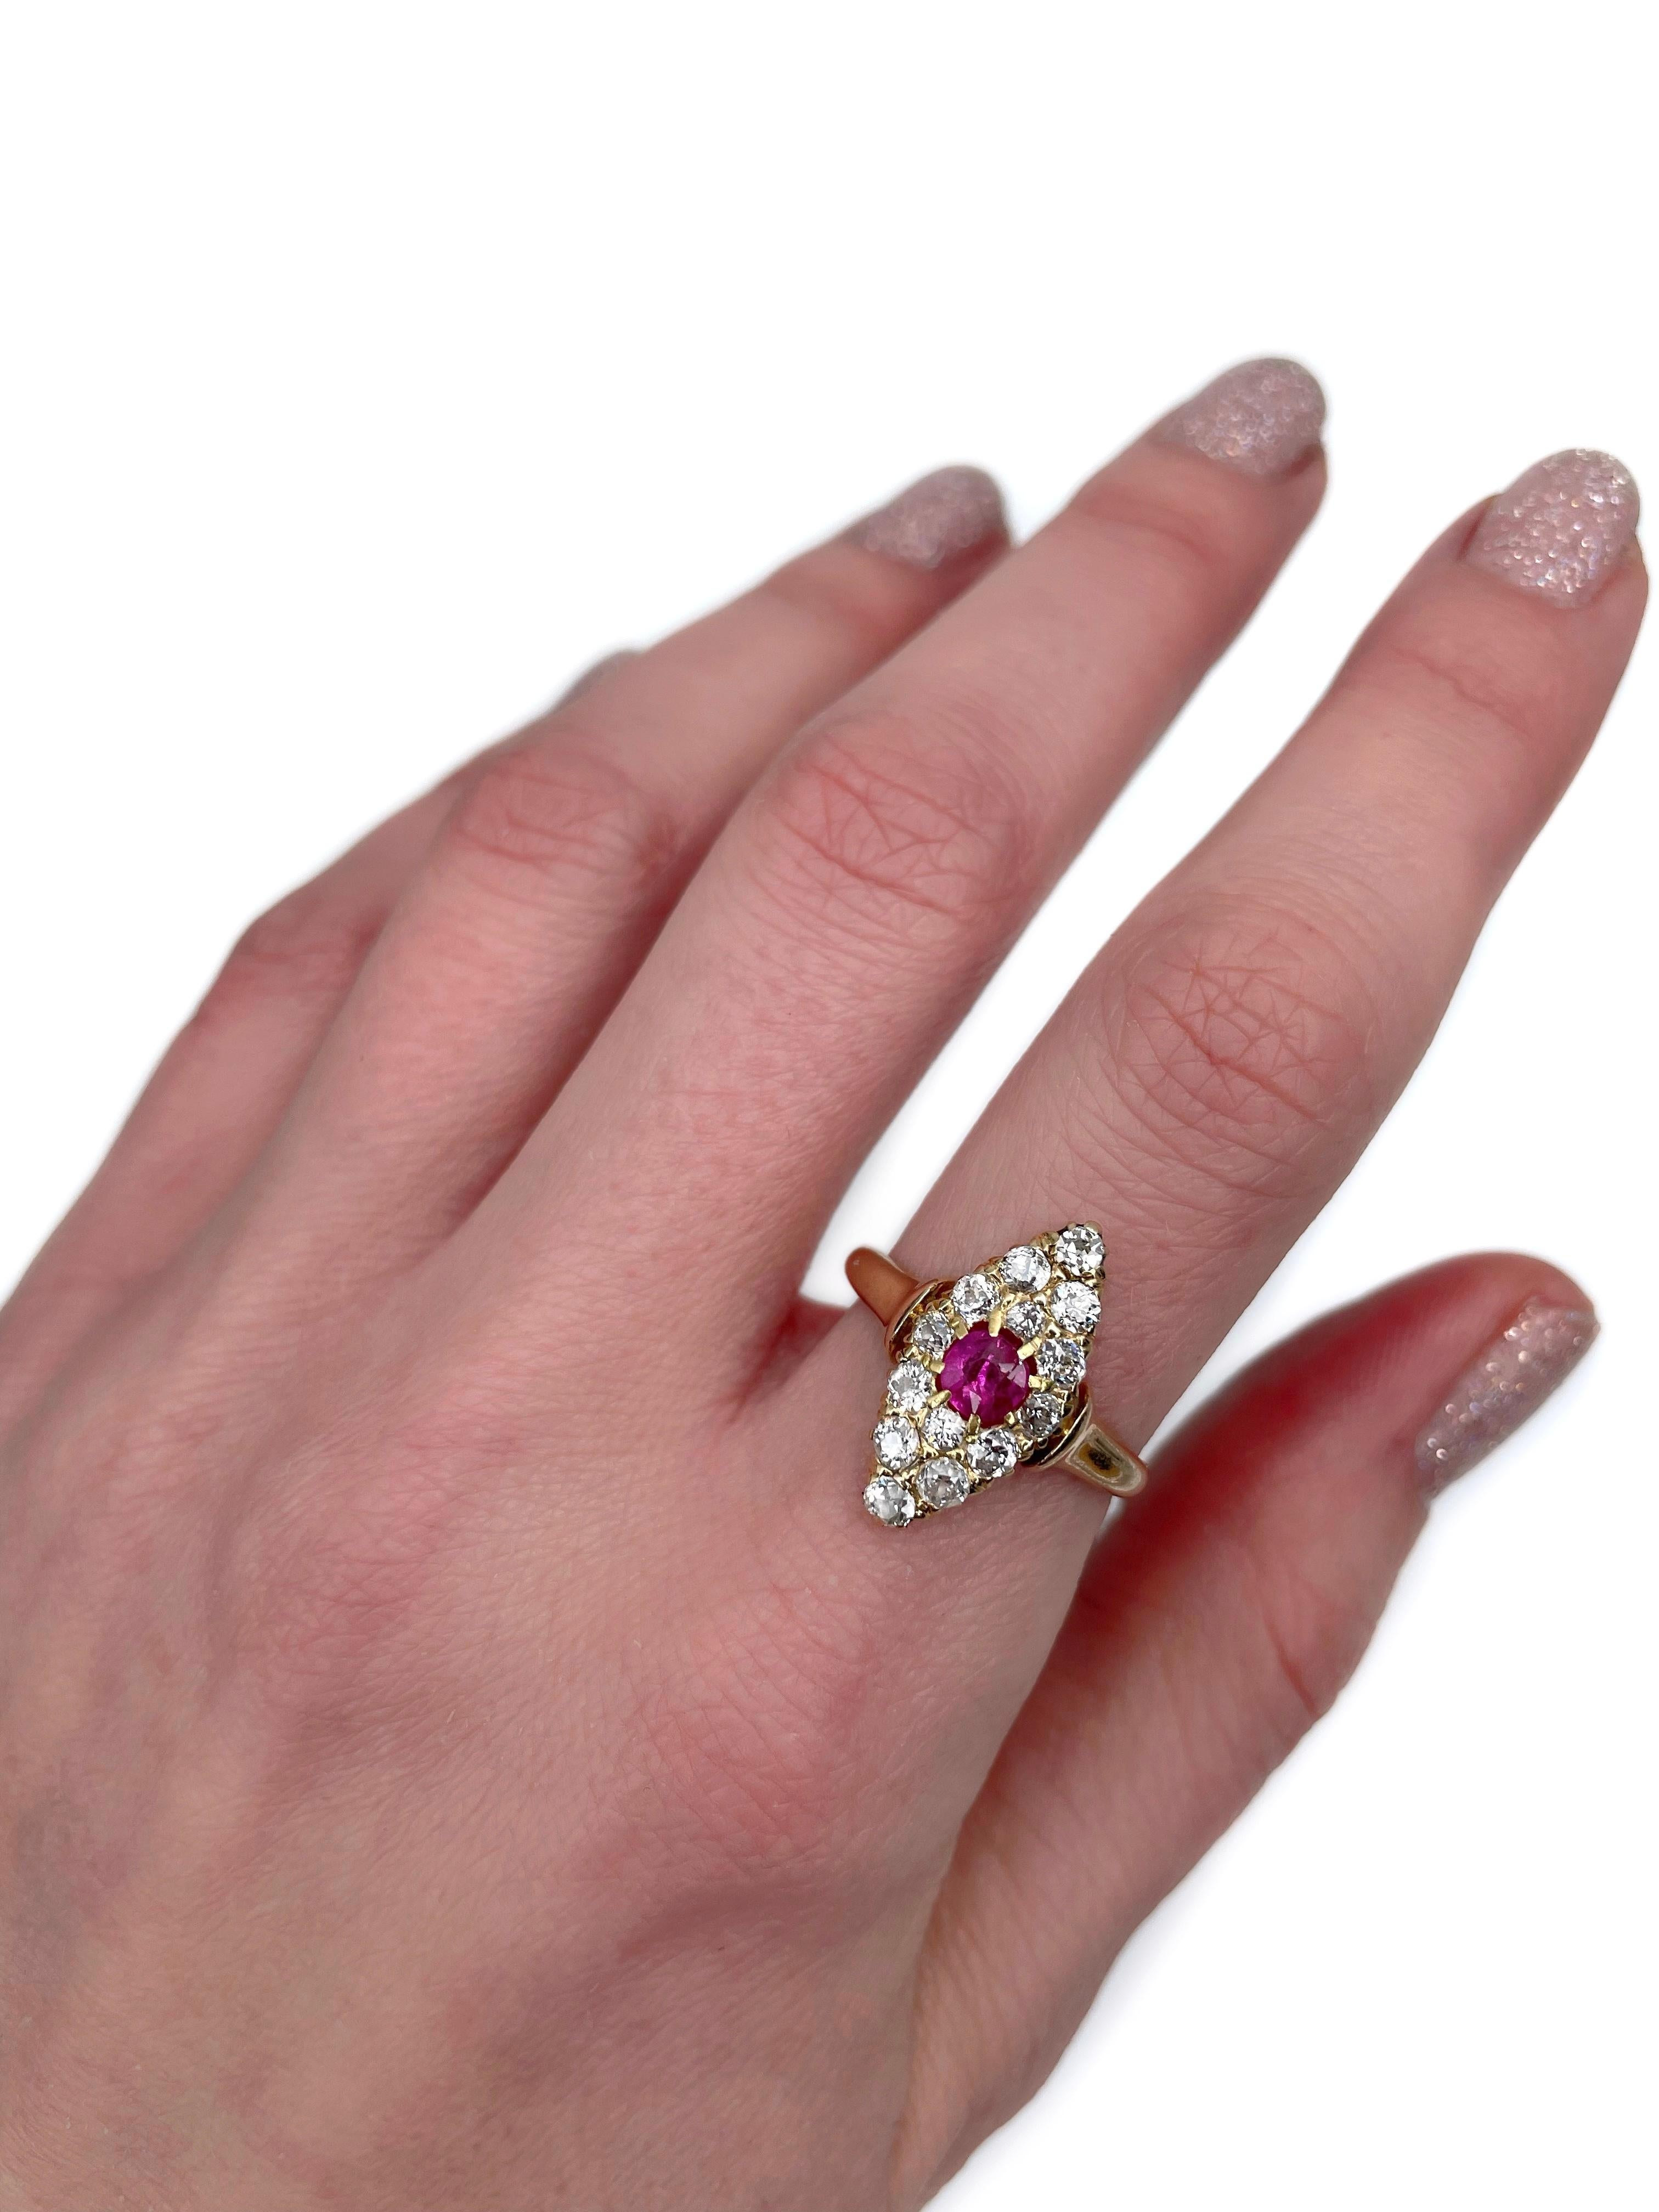 This is a Victorian navette ring crafted in 14K yellow gold. Circa 1890. 

 It features:
- 1 ruby: oval cut, 0.35ct, slpR 5/5, P3
- 14 diamonds: old cut, 0.72ct, G-H, VS-SI

There is a hallmark “585” engraved on the shank. 

Weight: 3.56g 
Size: